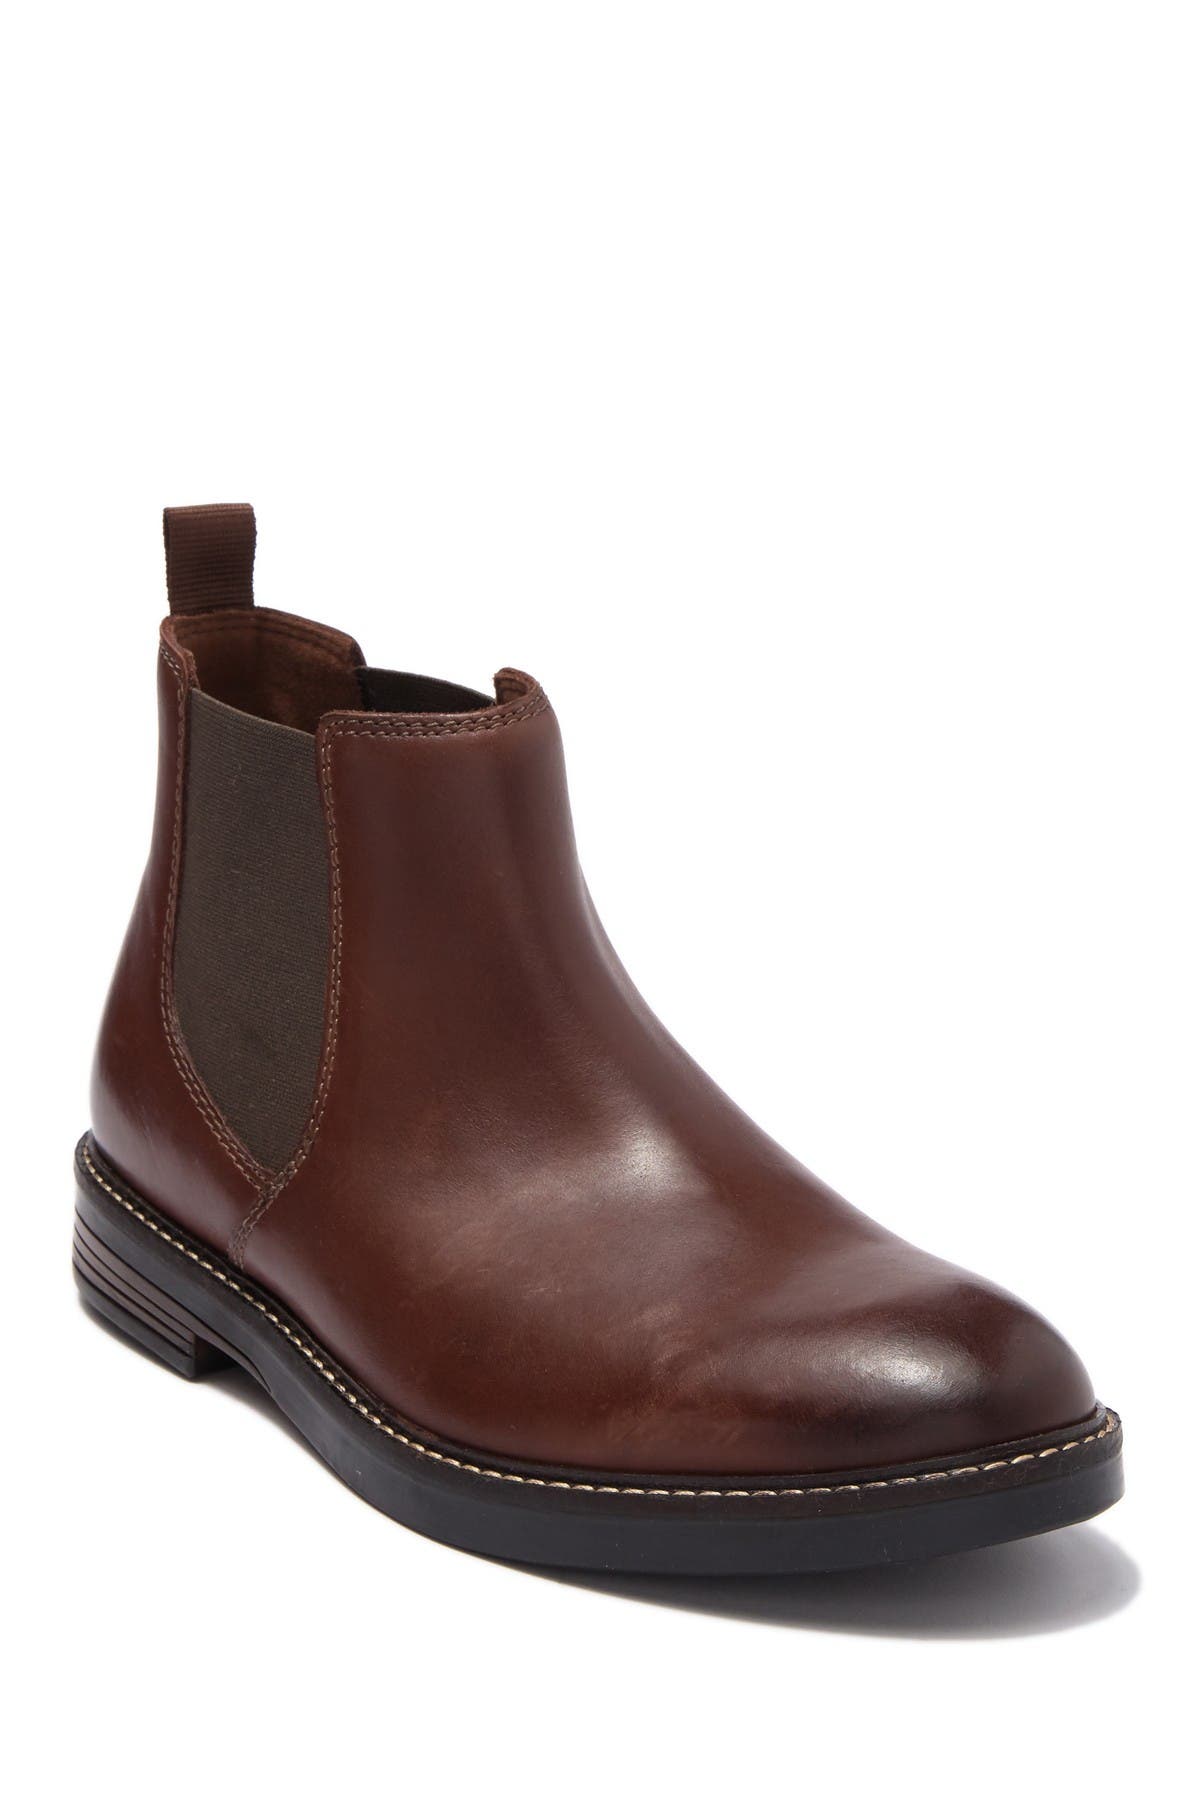 clarks chelsea boots canada